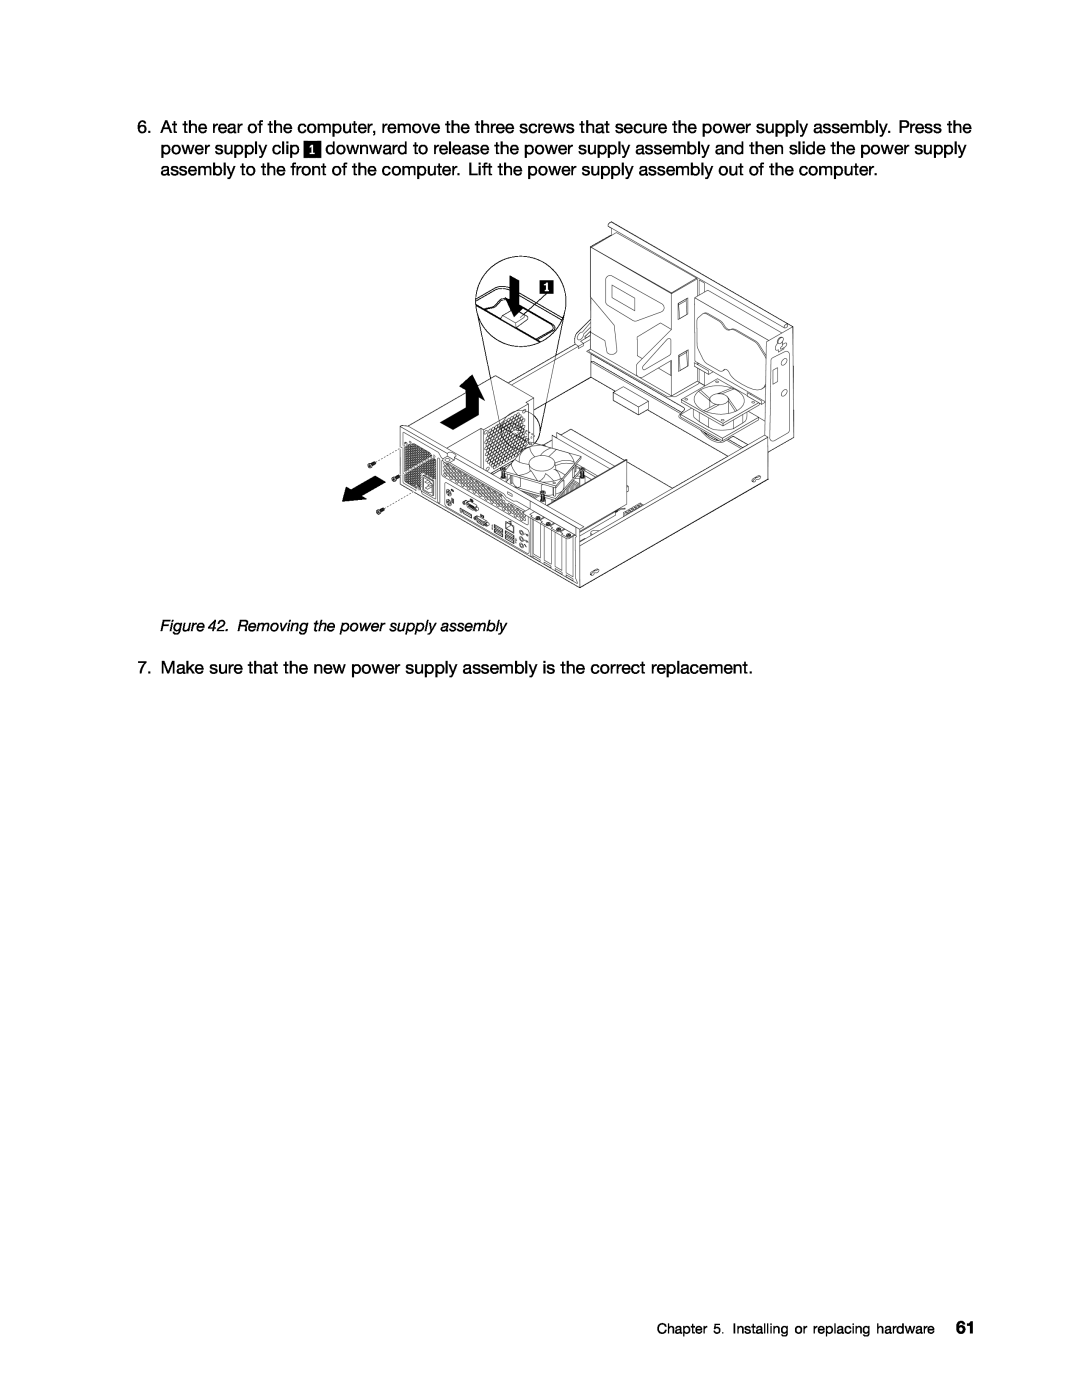 Lenovo M73 manual Removing the power supply assembly 